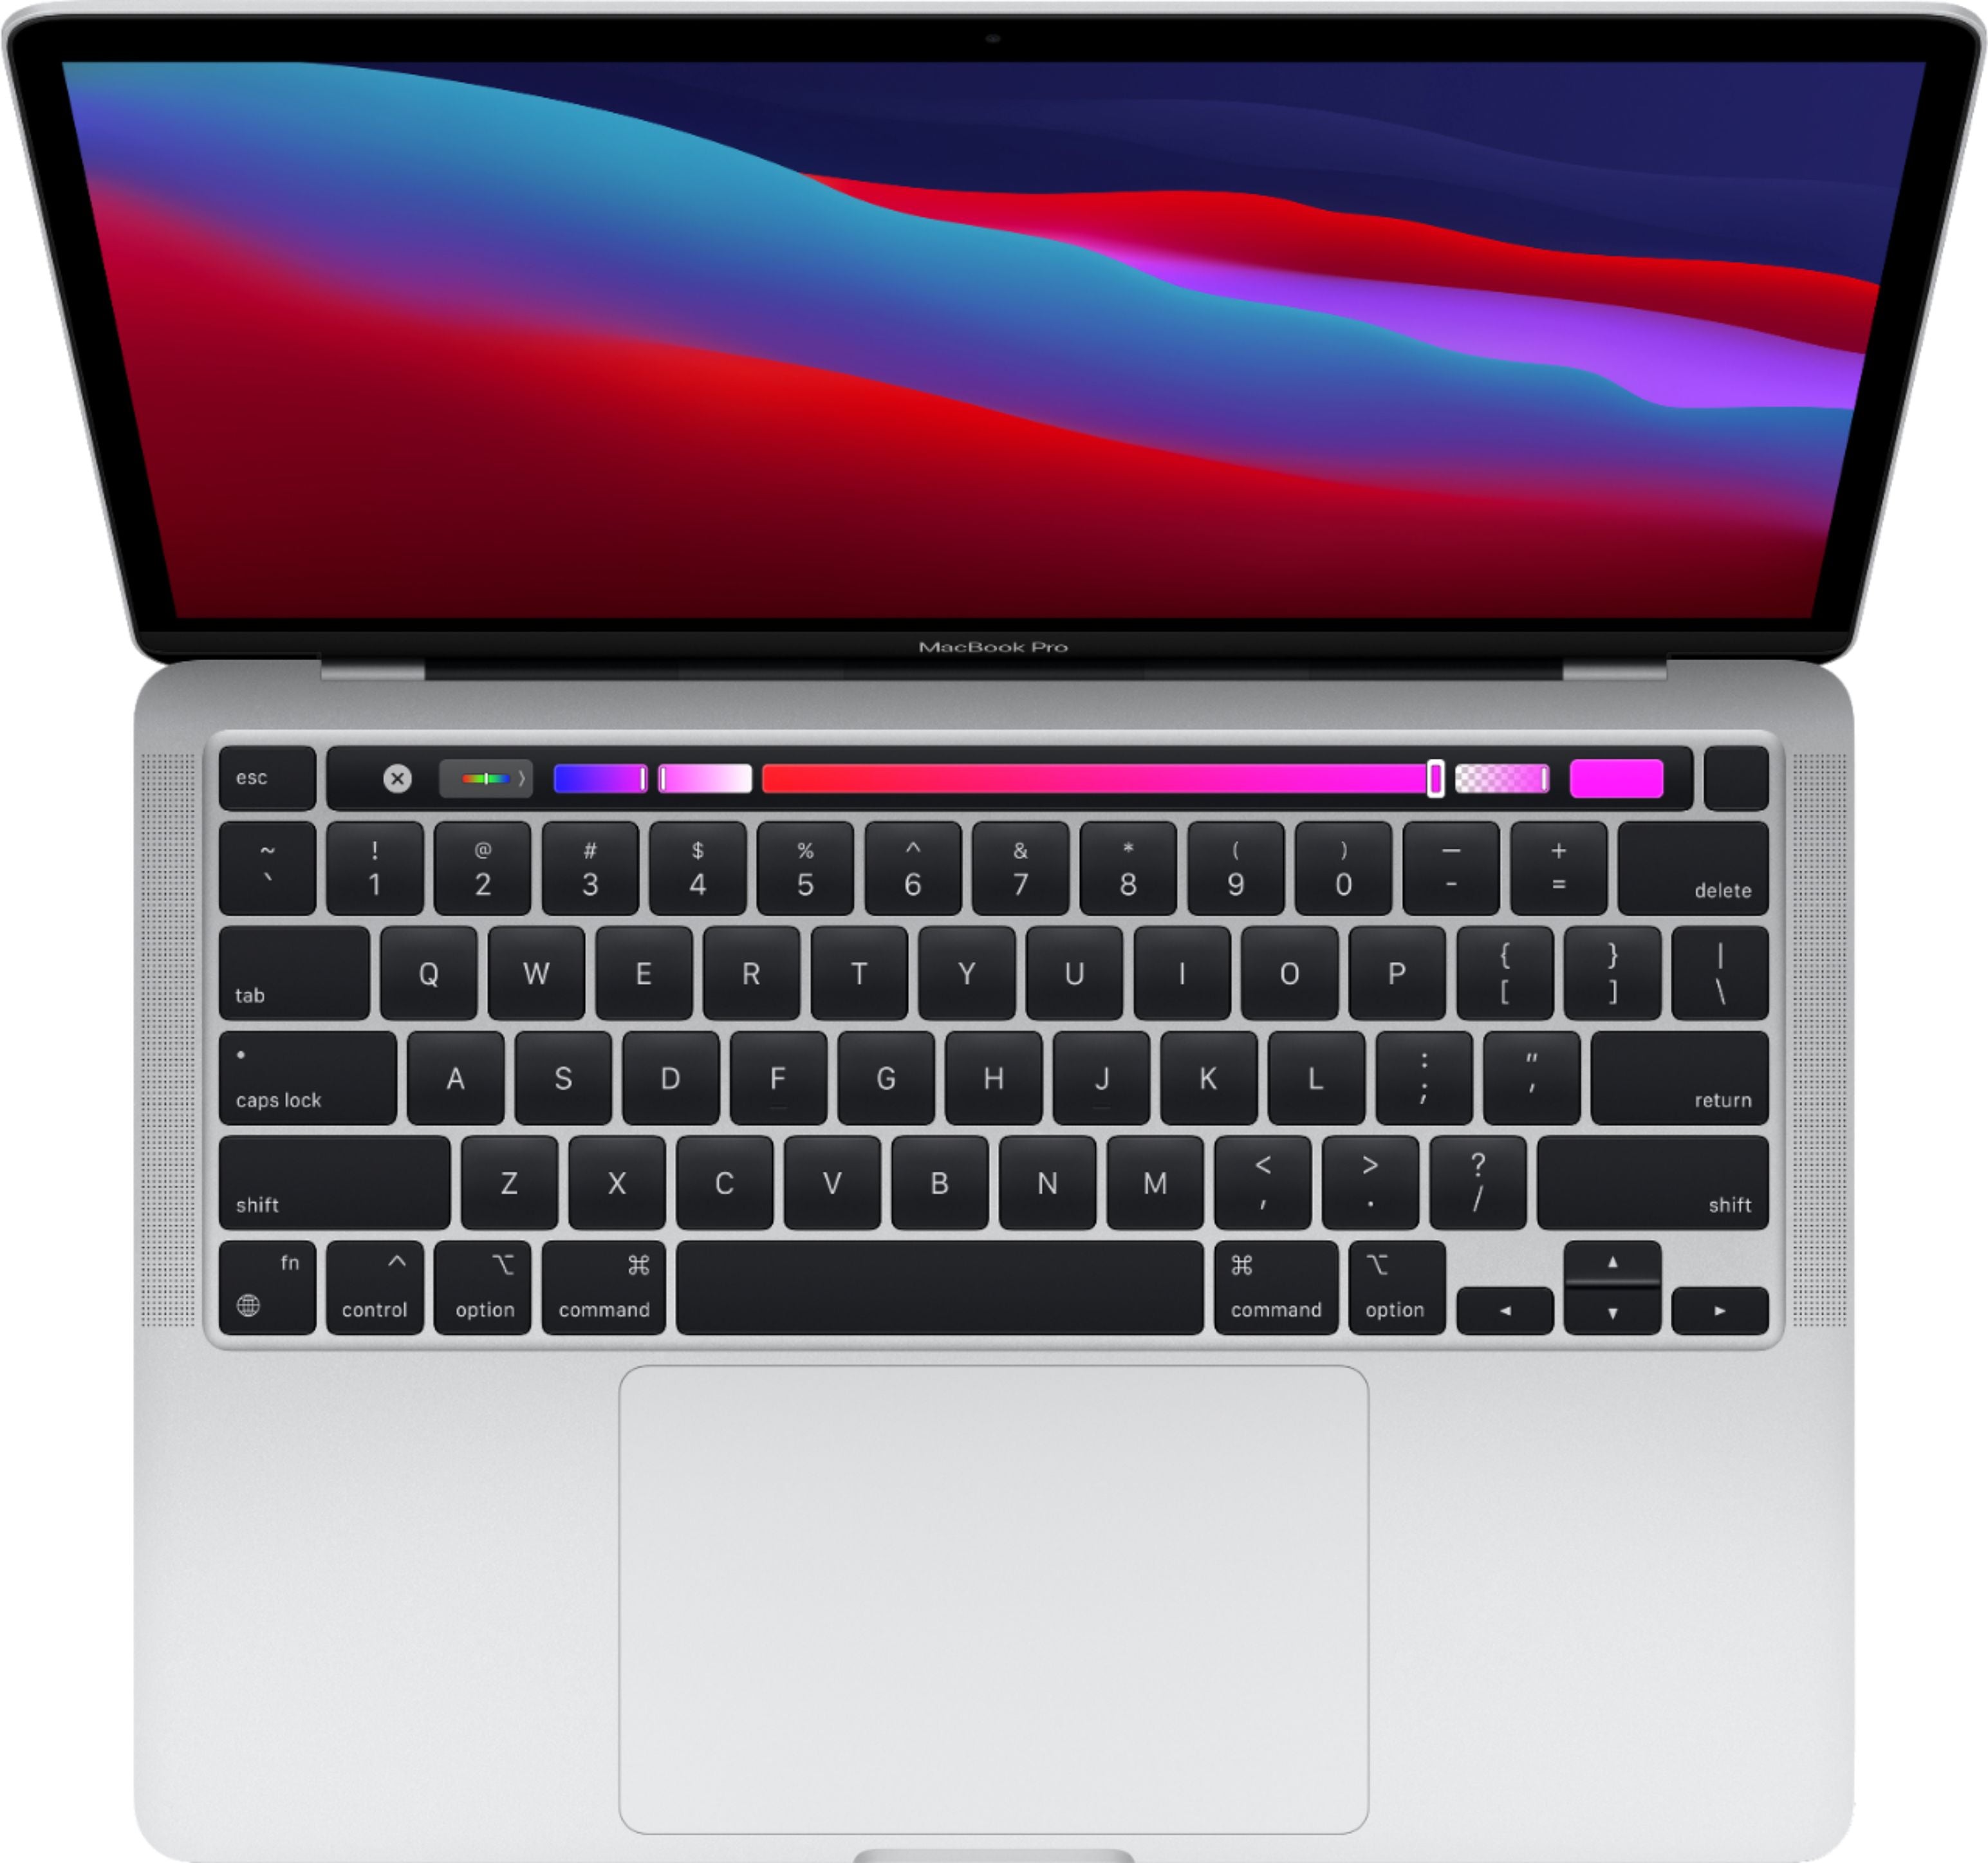 Apple MacBook Pro 13" Display with Touch Bar - Apple M1/8GB RAM/256GB SSD - Silver